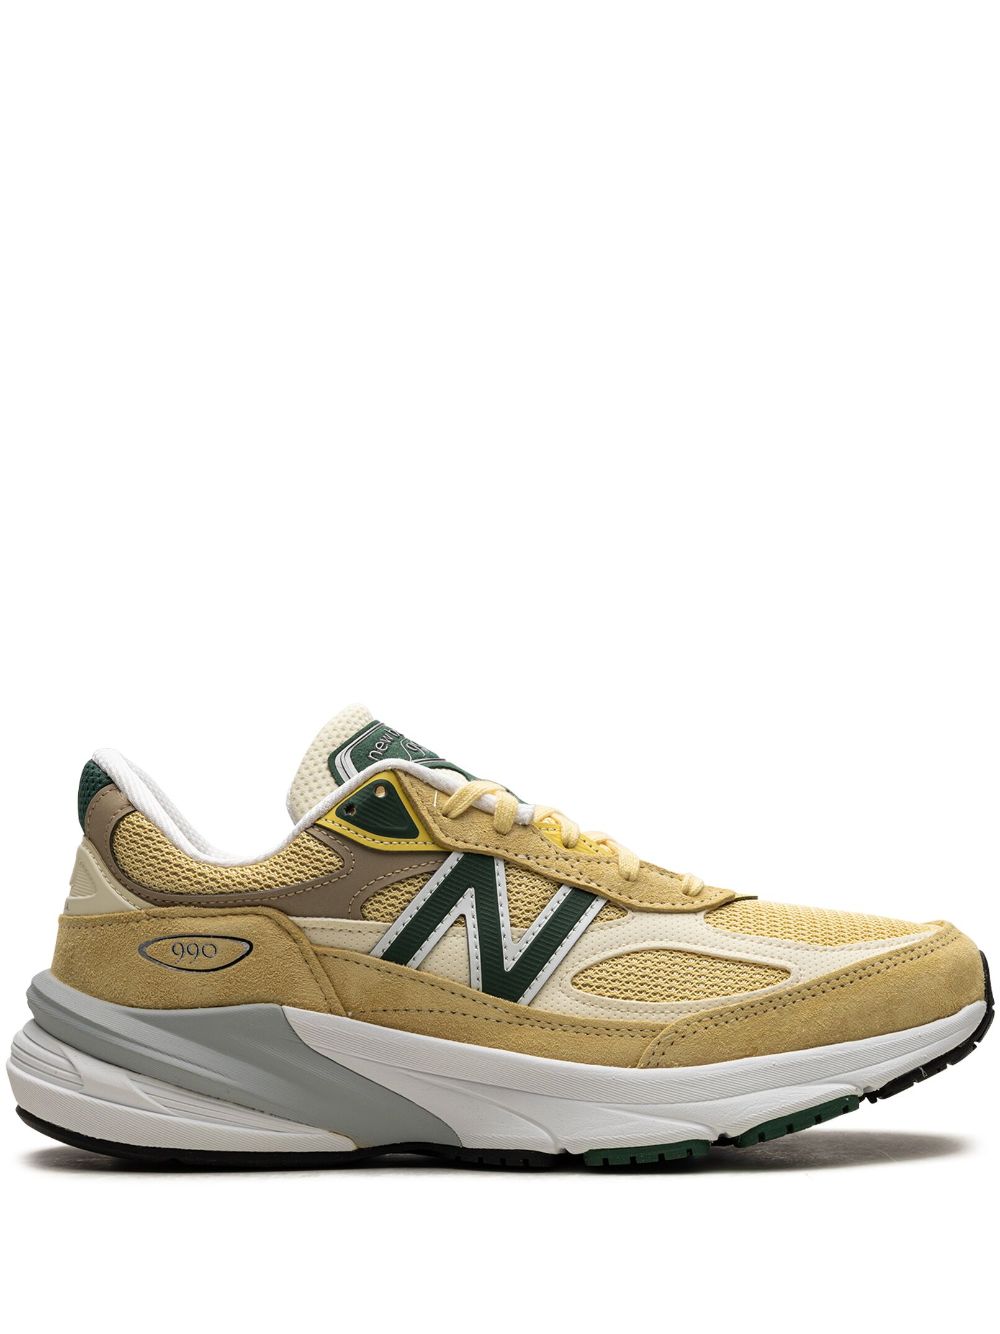 New Balance 990 "Pale Yellow/Forest Green" sneakers